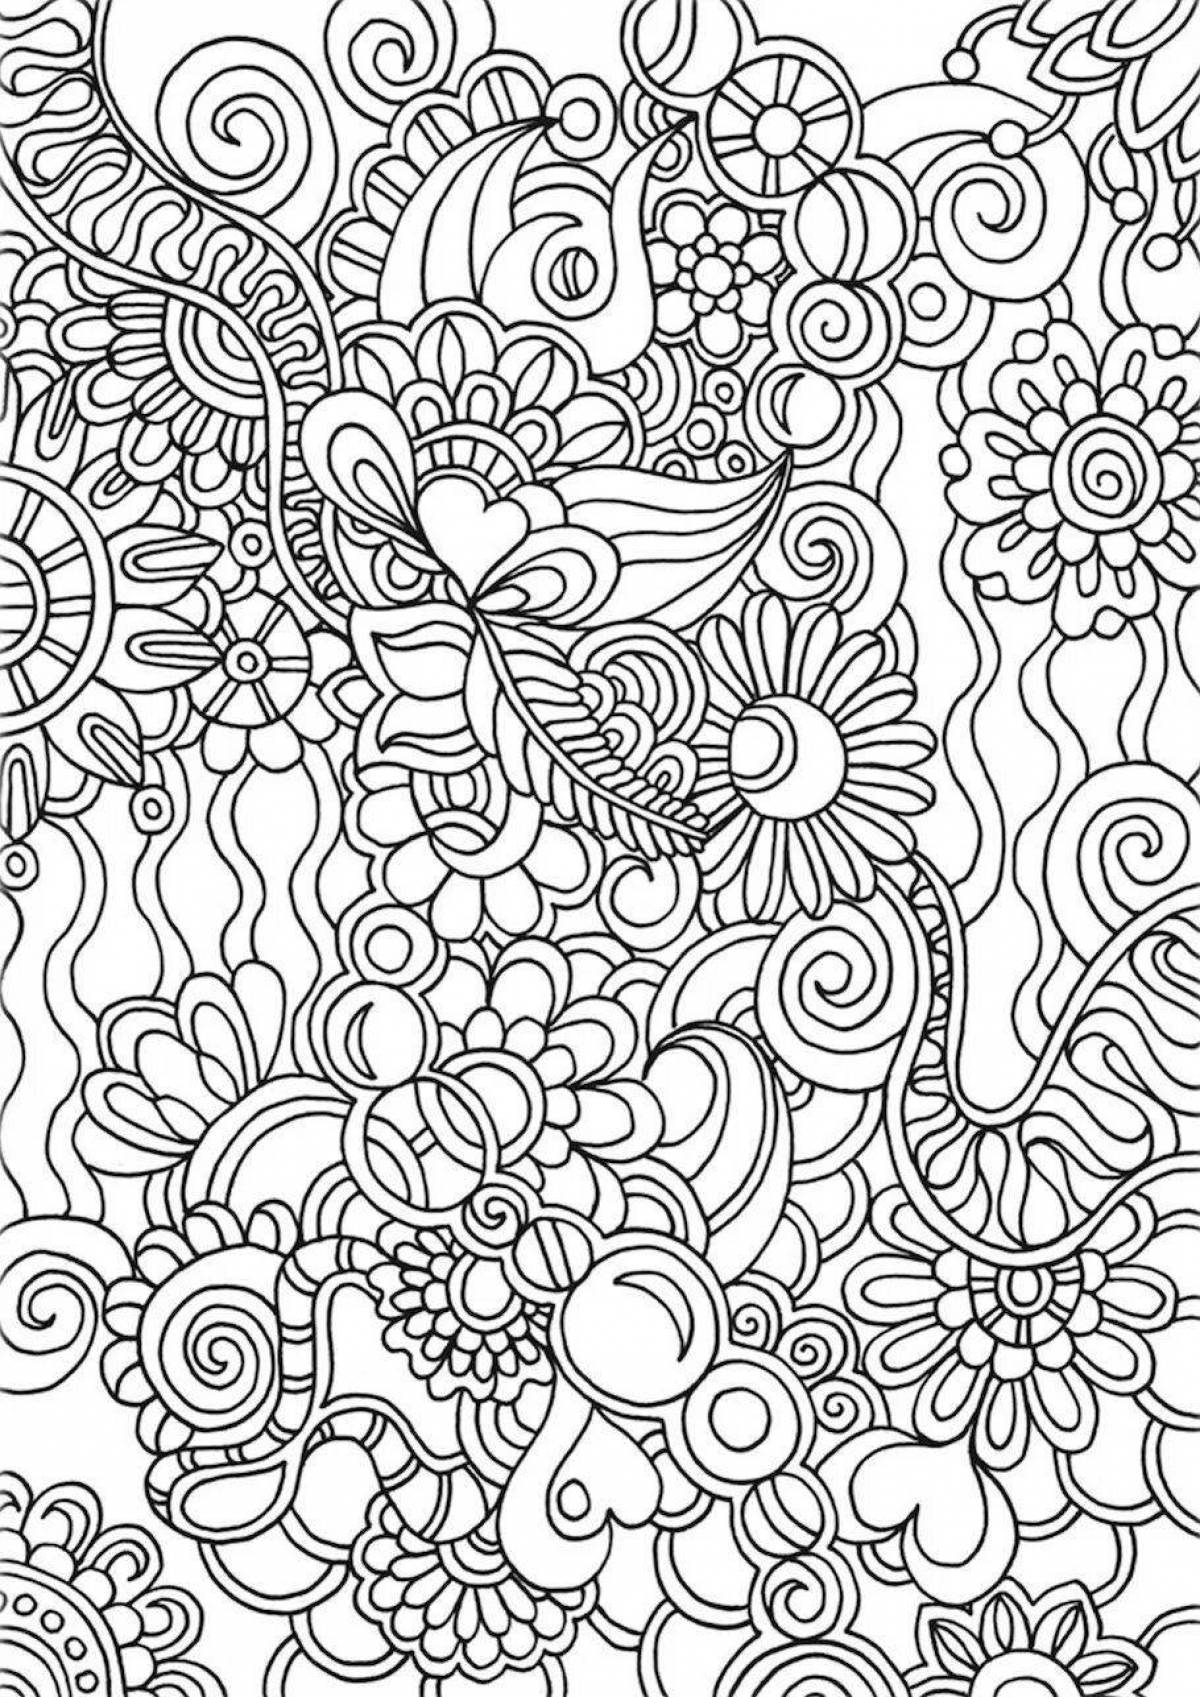 Soft patterns for coloring pages